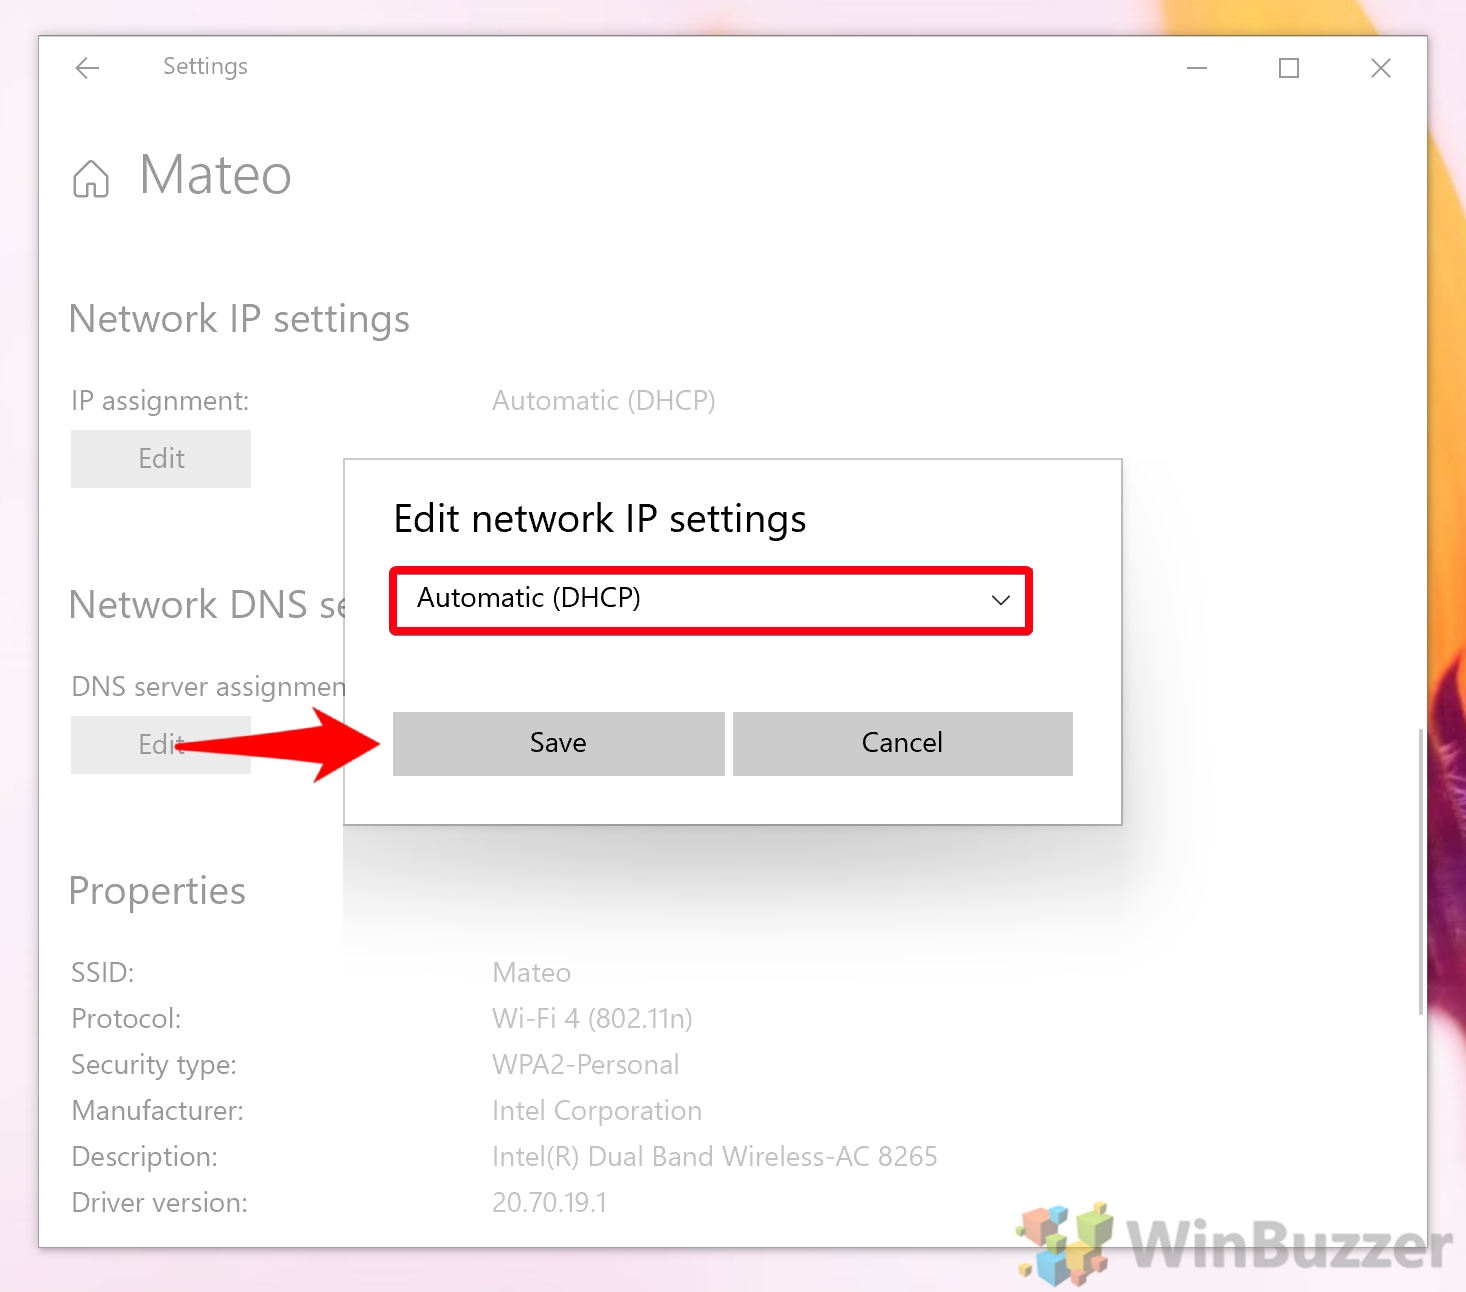 Windows 10 - Settings - Network & Internet - Wifi - Edit IP Assignment - Automatic